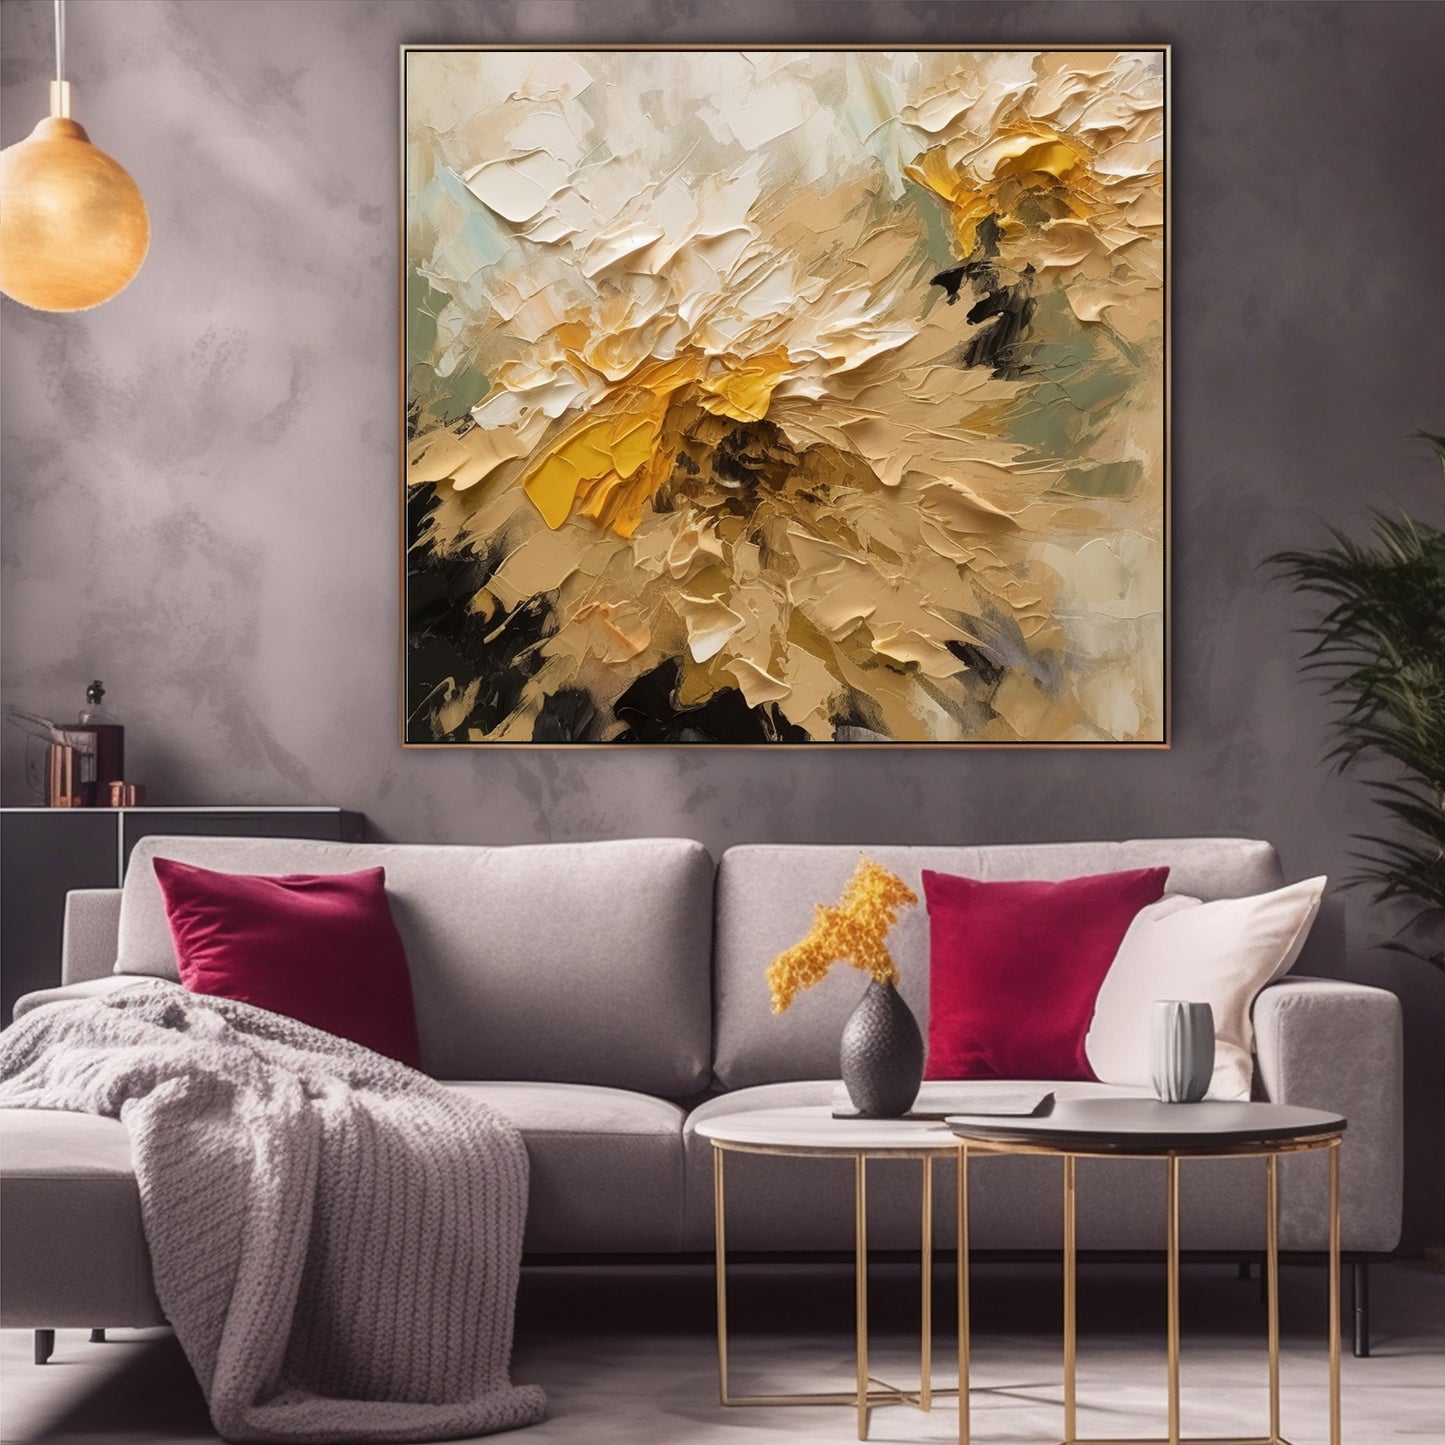 Abstract 3D Flower Oil Painting Texture Floral Wall Art Minimalist Living Room Decor Gift F0416A2340